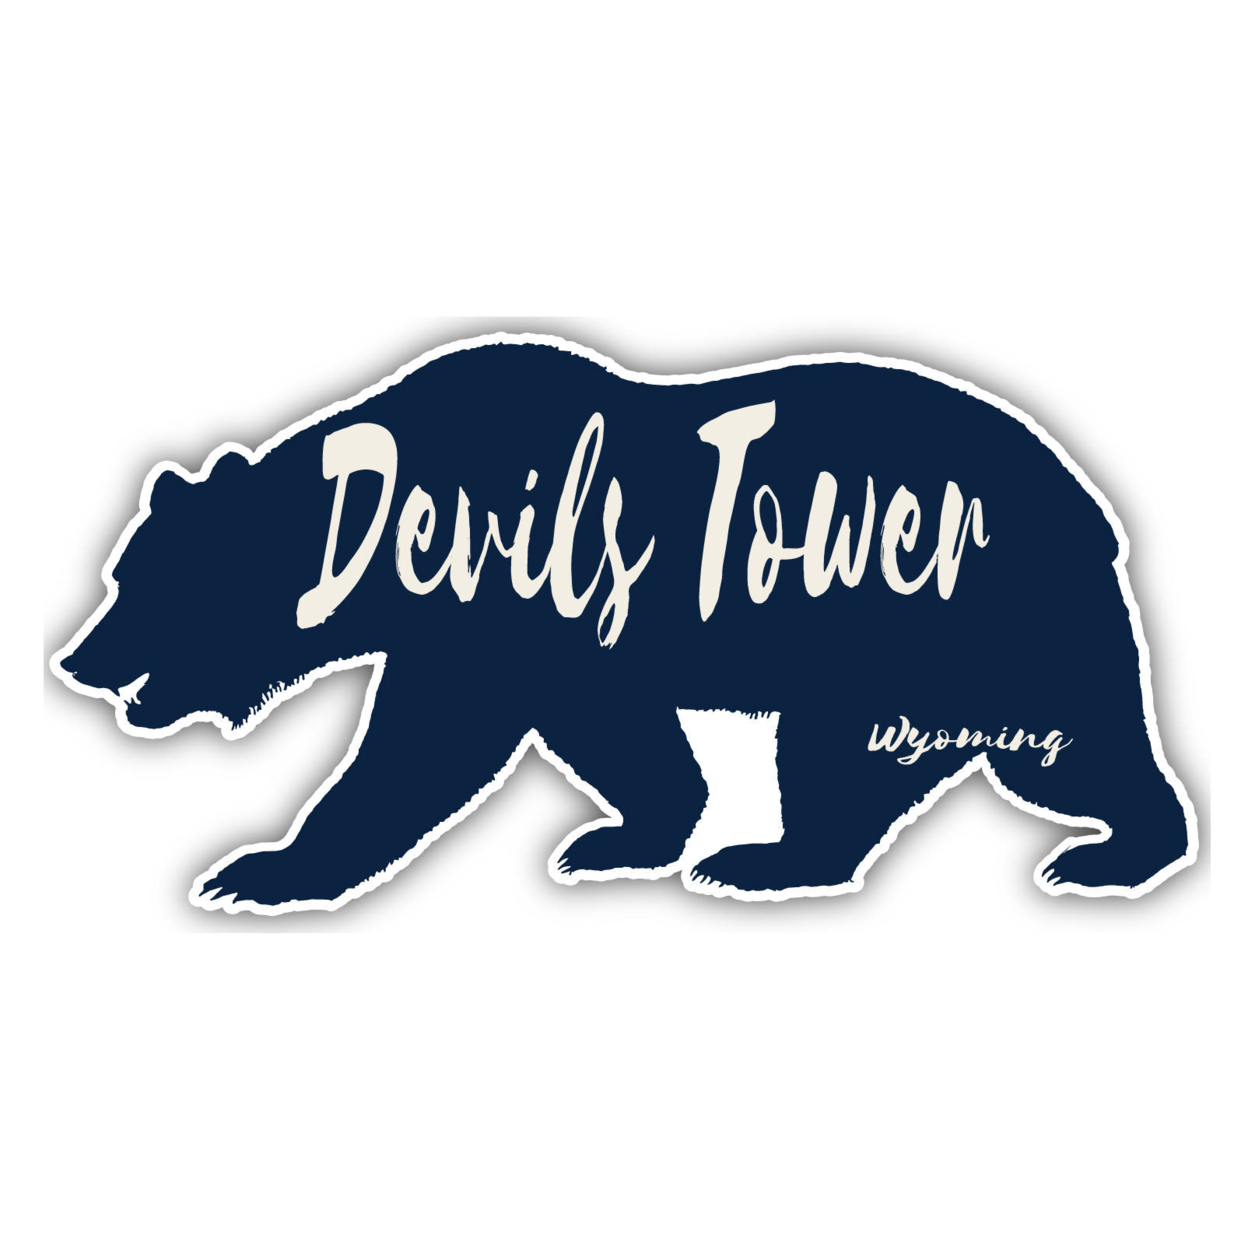 Devils Tower Wyoming Souvenir Decorative Stickers (Choose Theme And Size) - 4-Pack, 4-Inch, Adventures Awaits